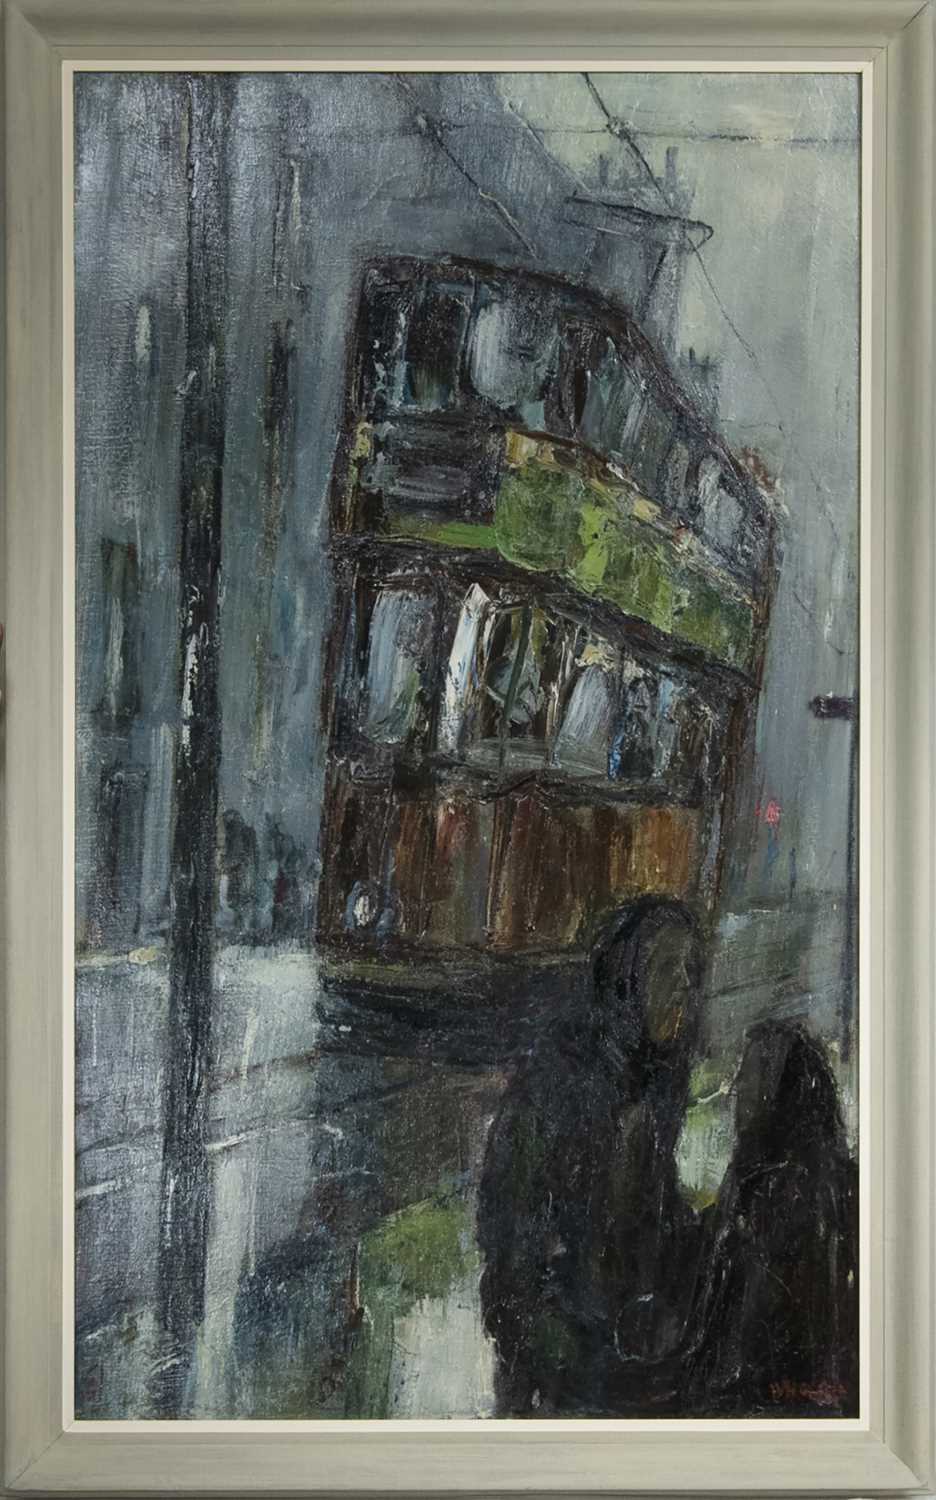 Lot 2030 - TRAM & FIGURES IN RAIN, BYRES ROAD, AN EXCEPTIONAL AND LARGE OIL BY HERBERT WHONE